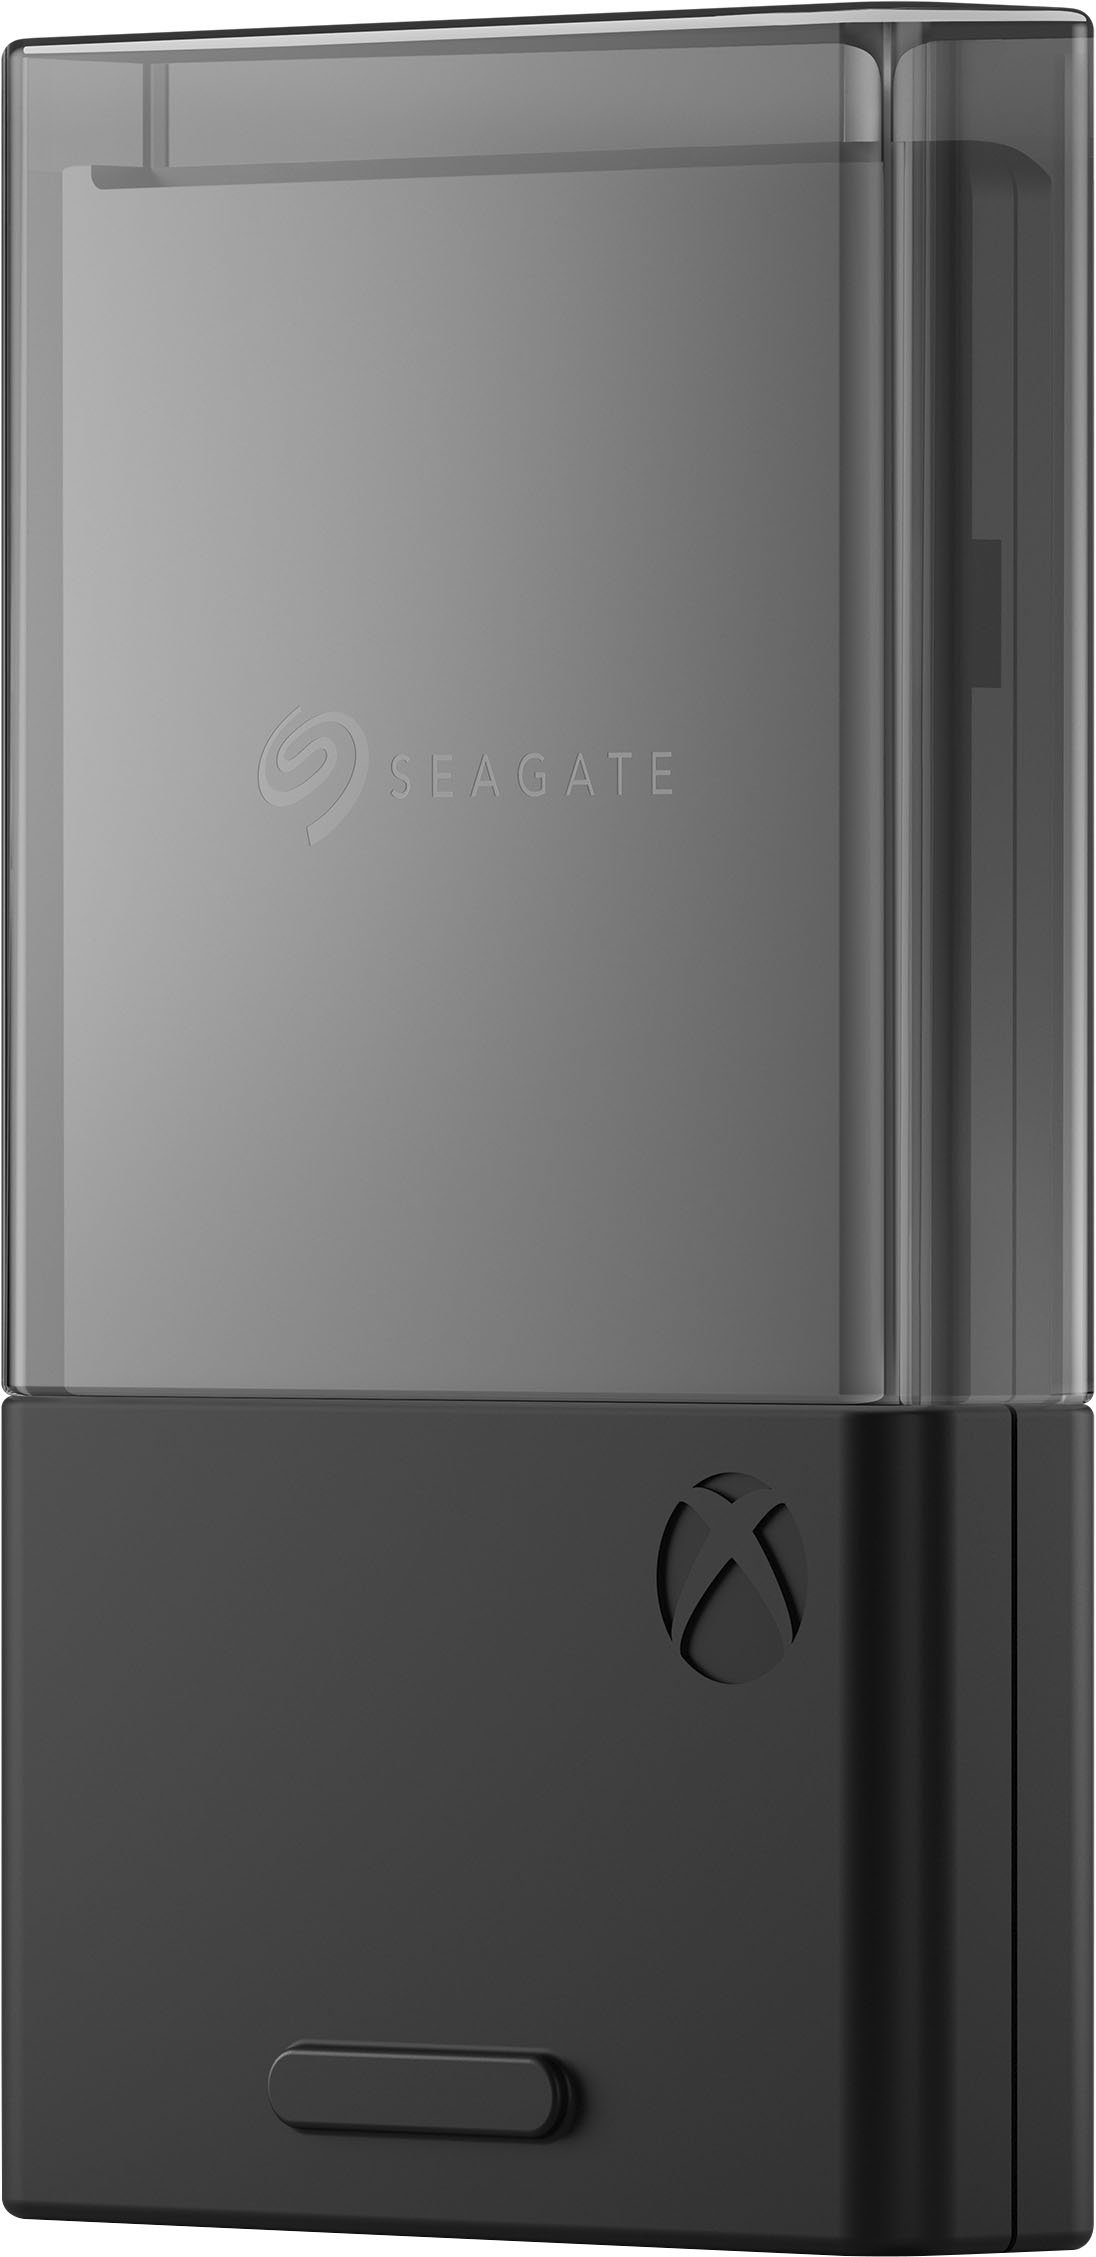 Seagate 2TB Storage Expansion Card for Xbox Series X|S Internal NVMe SSD  Black STJR2000400 - Best Buy